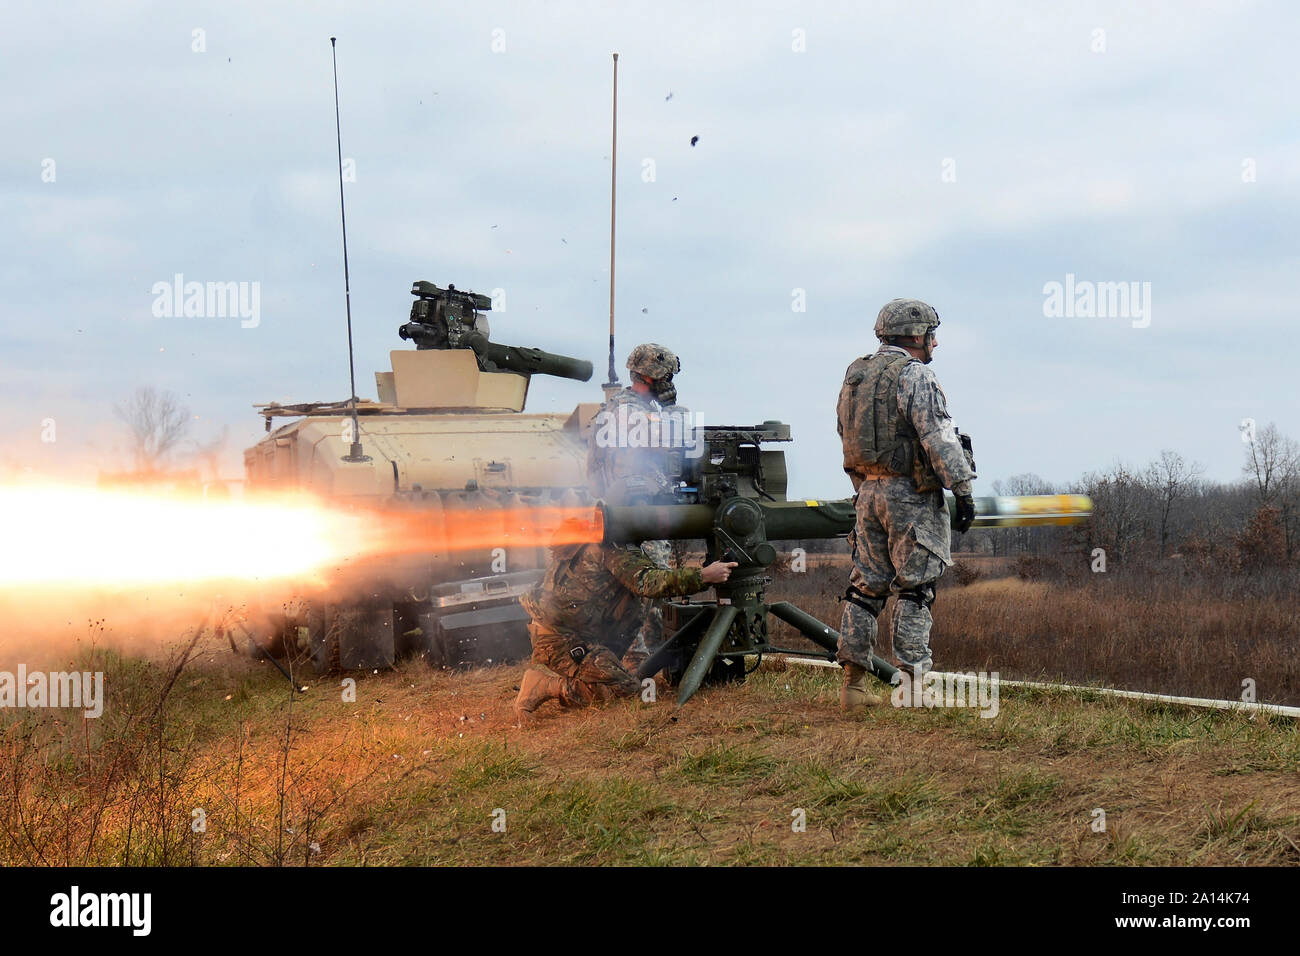 A special forces weapons sergeant fires a BGM-71 TOW missile. Stock Photo